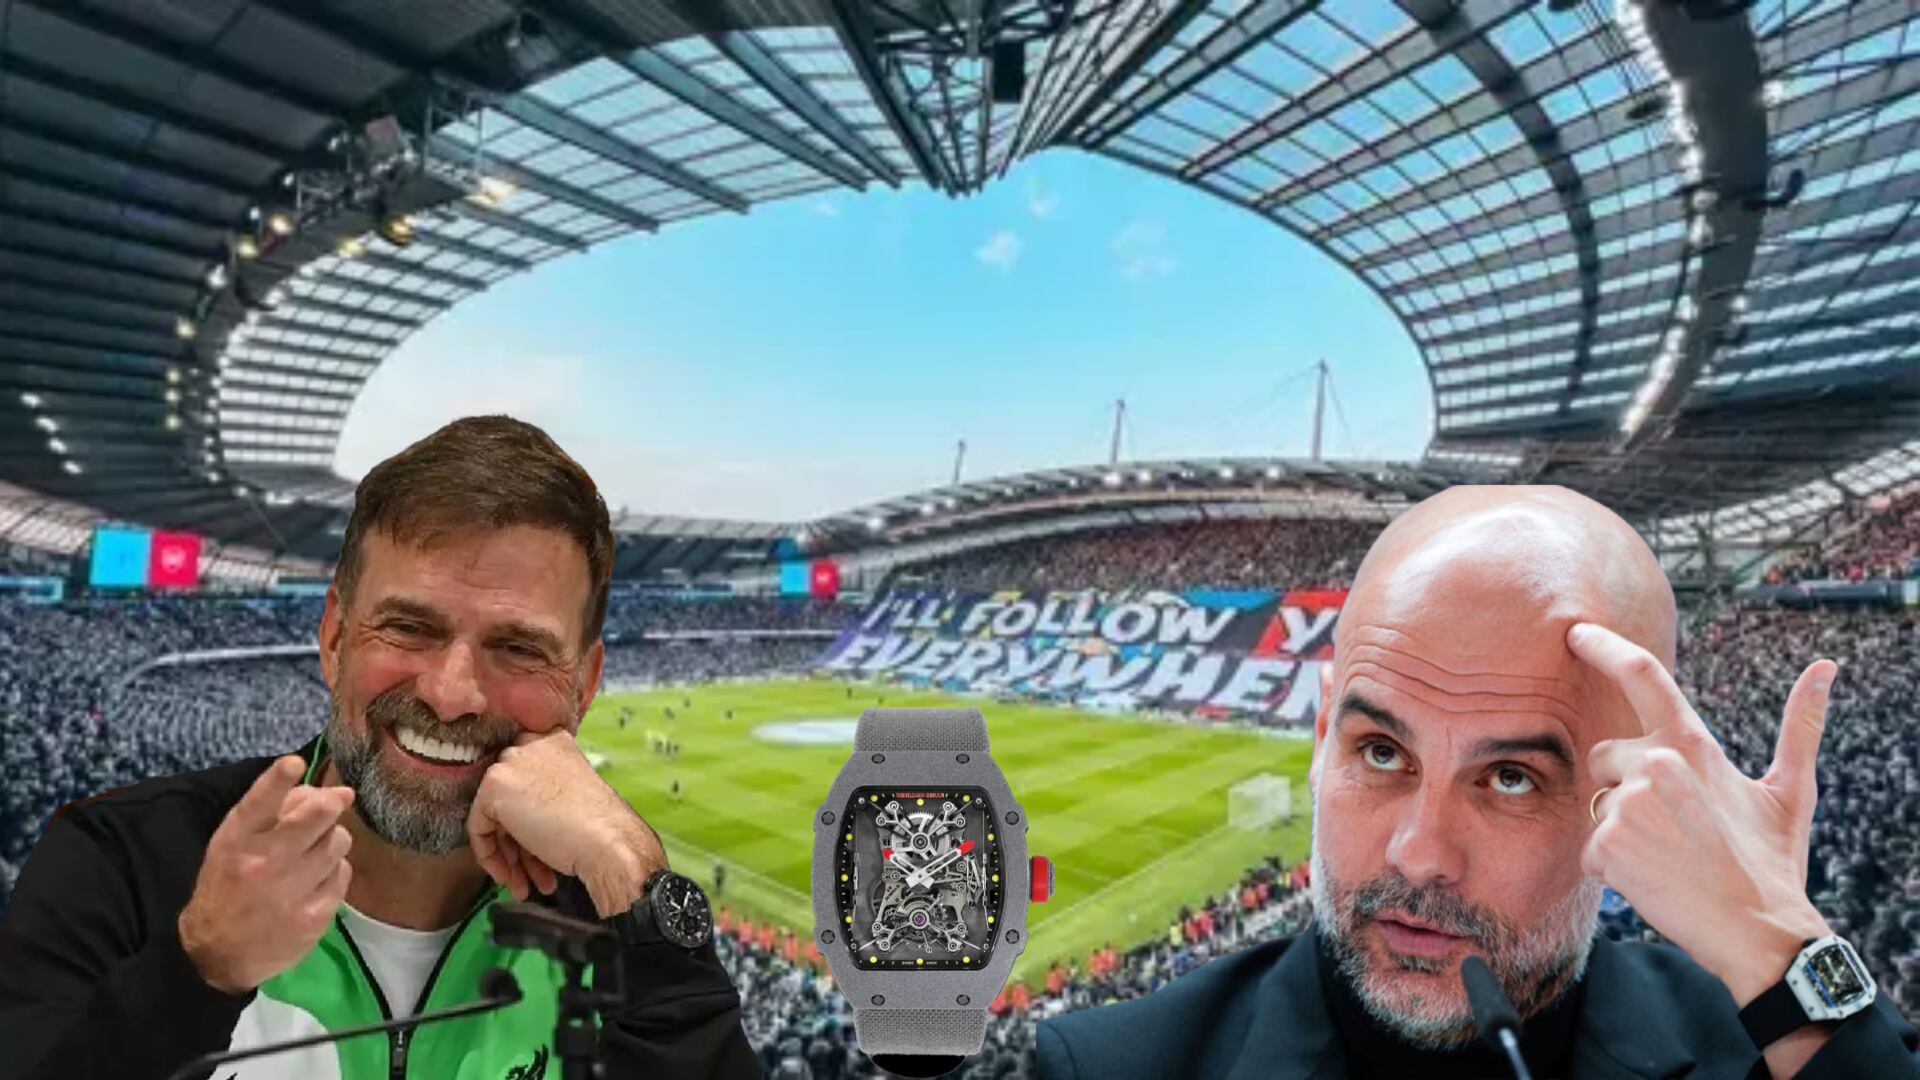 As Klopp has a 43k watch, Guardiola's luxurious watch is worth this much